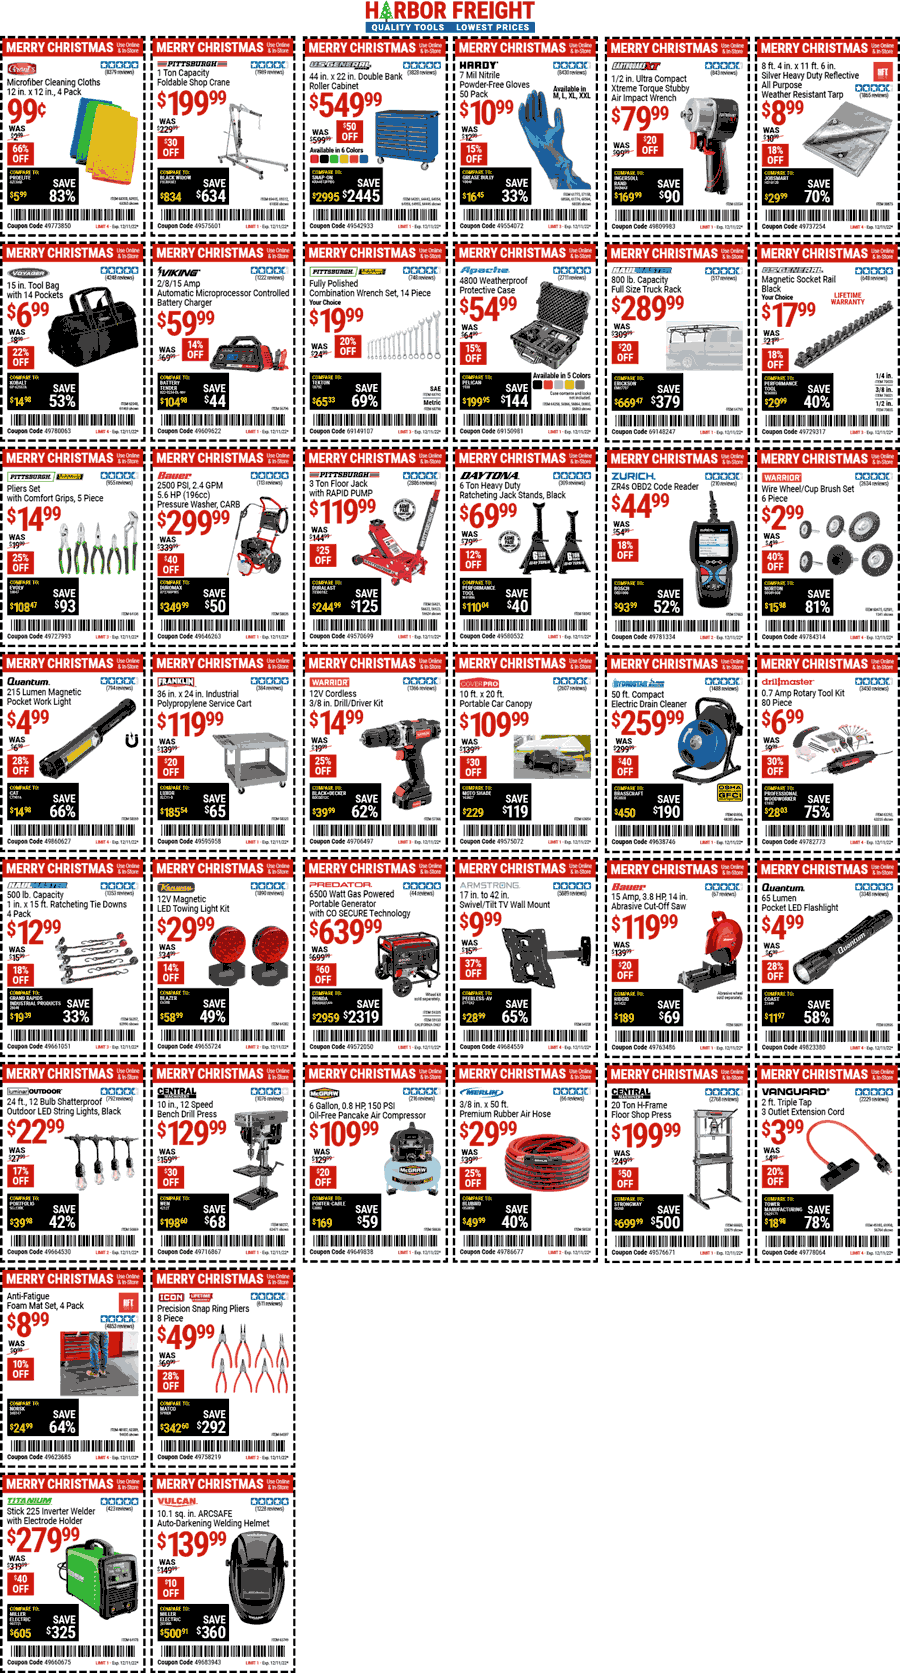 Harbor Freight stores Coupon  Various deals at Harbor Freight Tools #harborfreight 